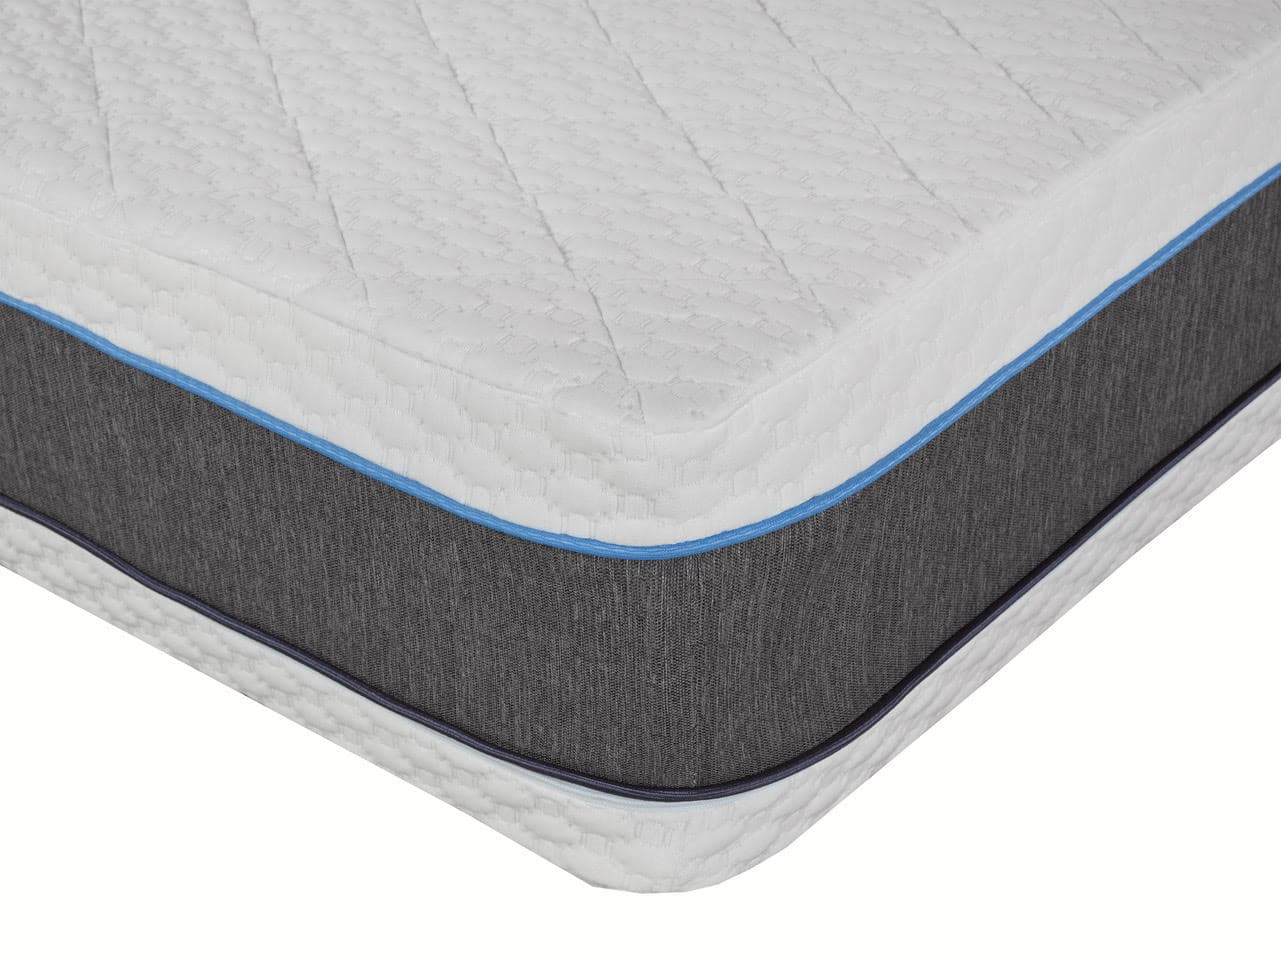 The Hard Bed™ Extra-Firm Mattress